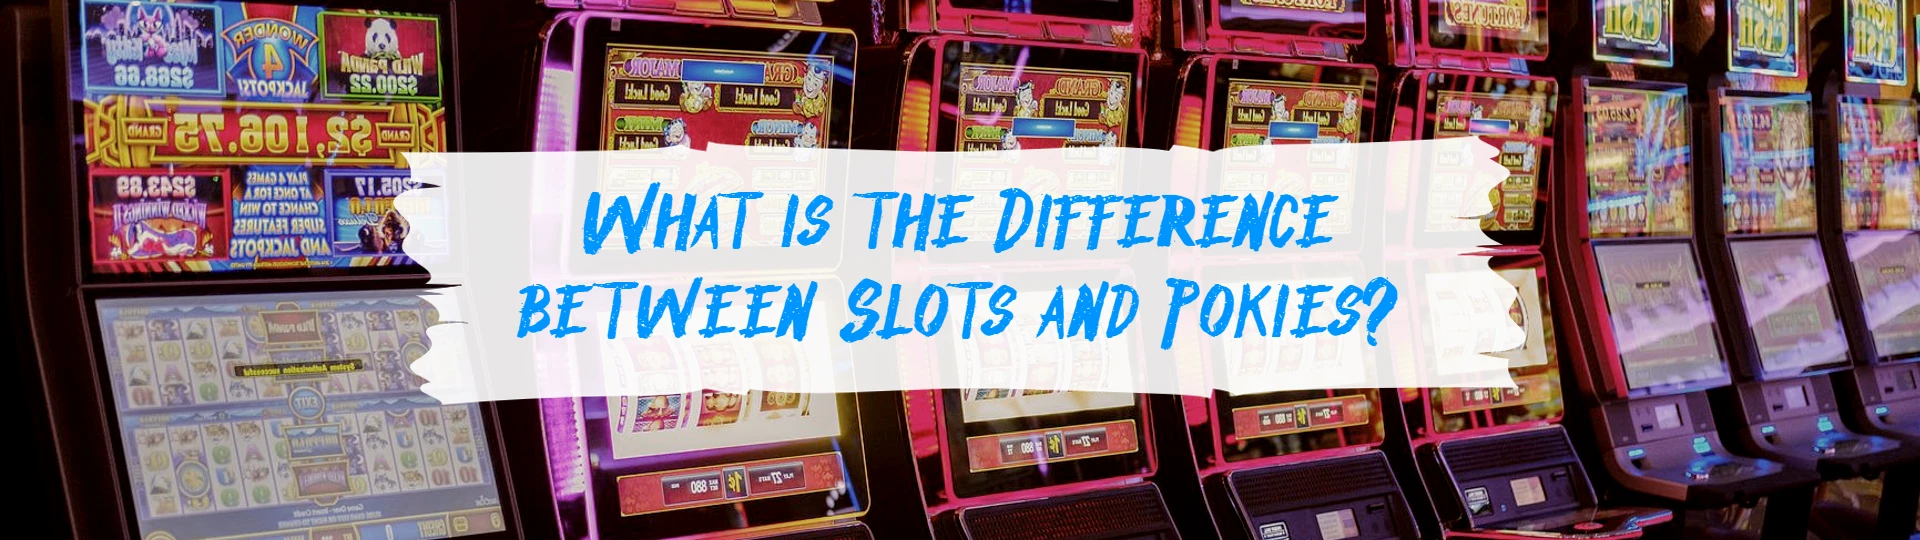 What is the Difference between Slots and Pokie games